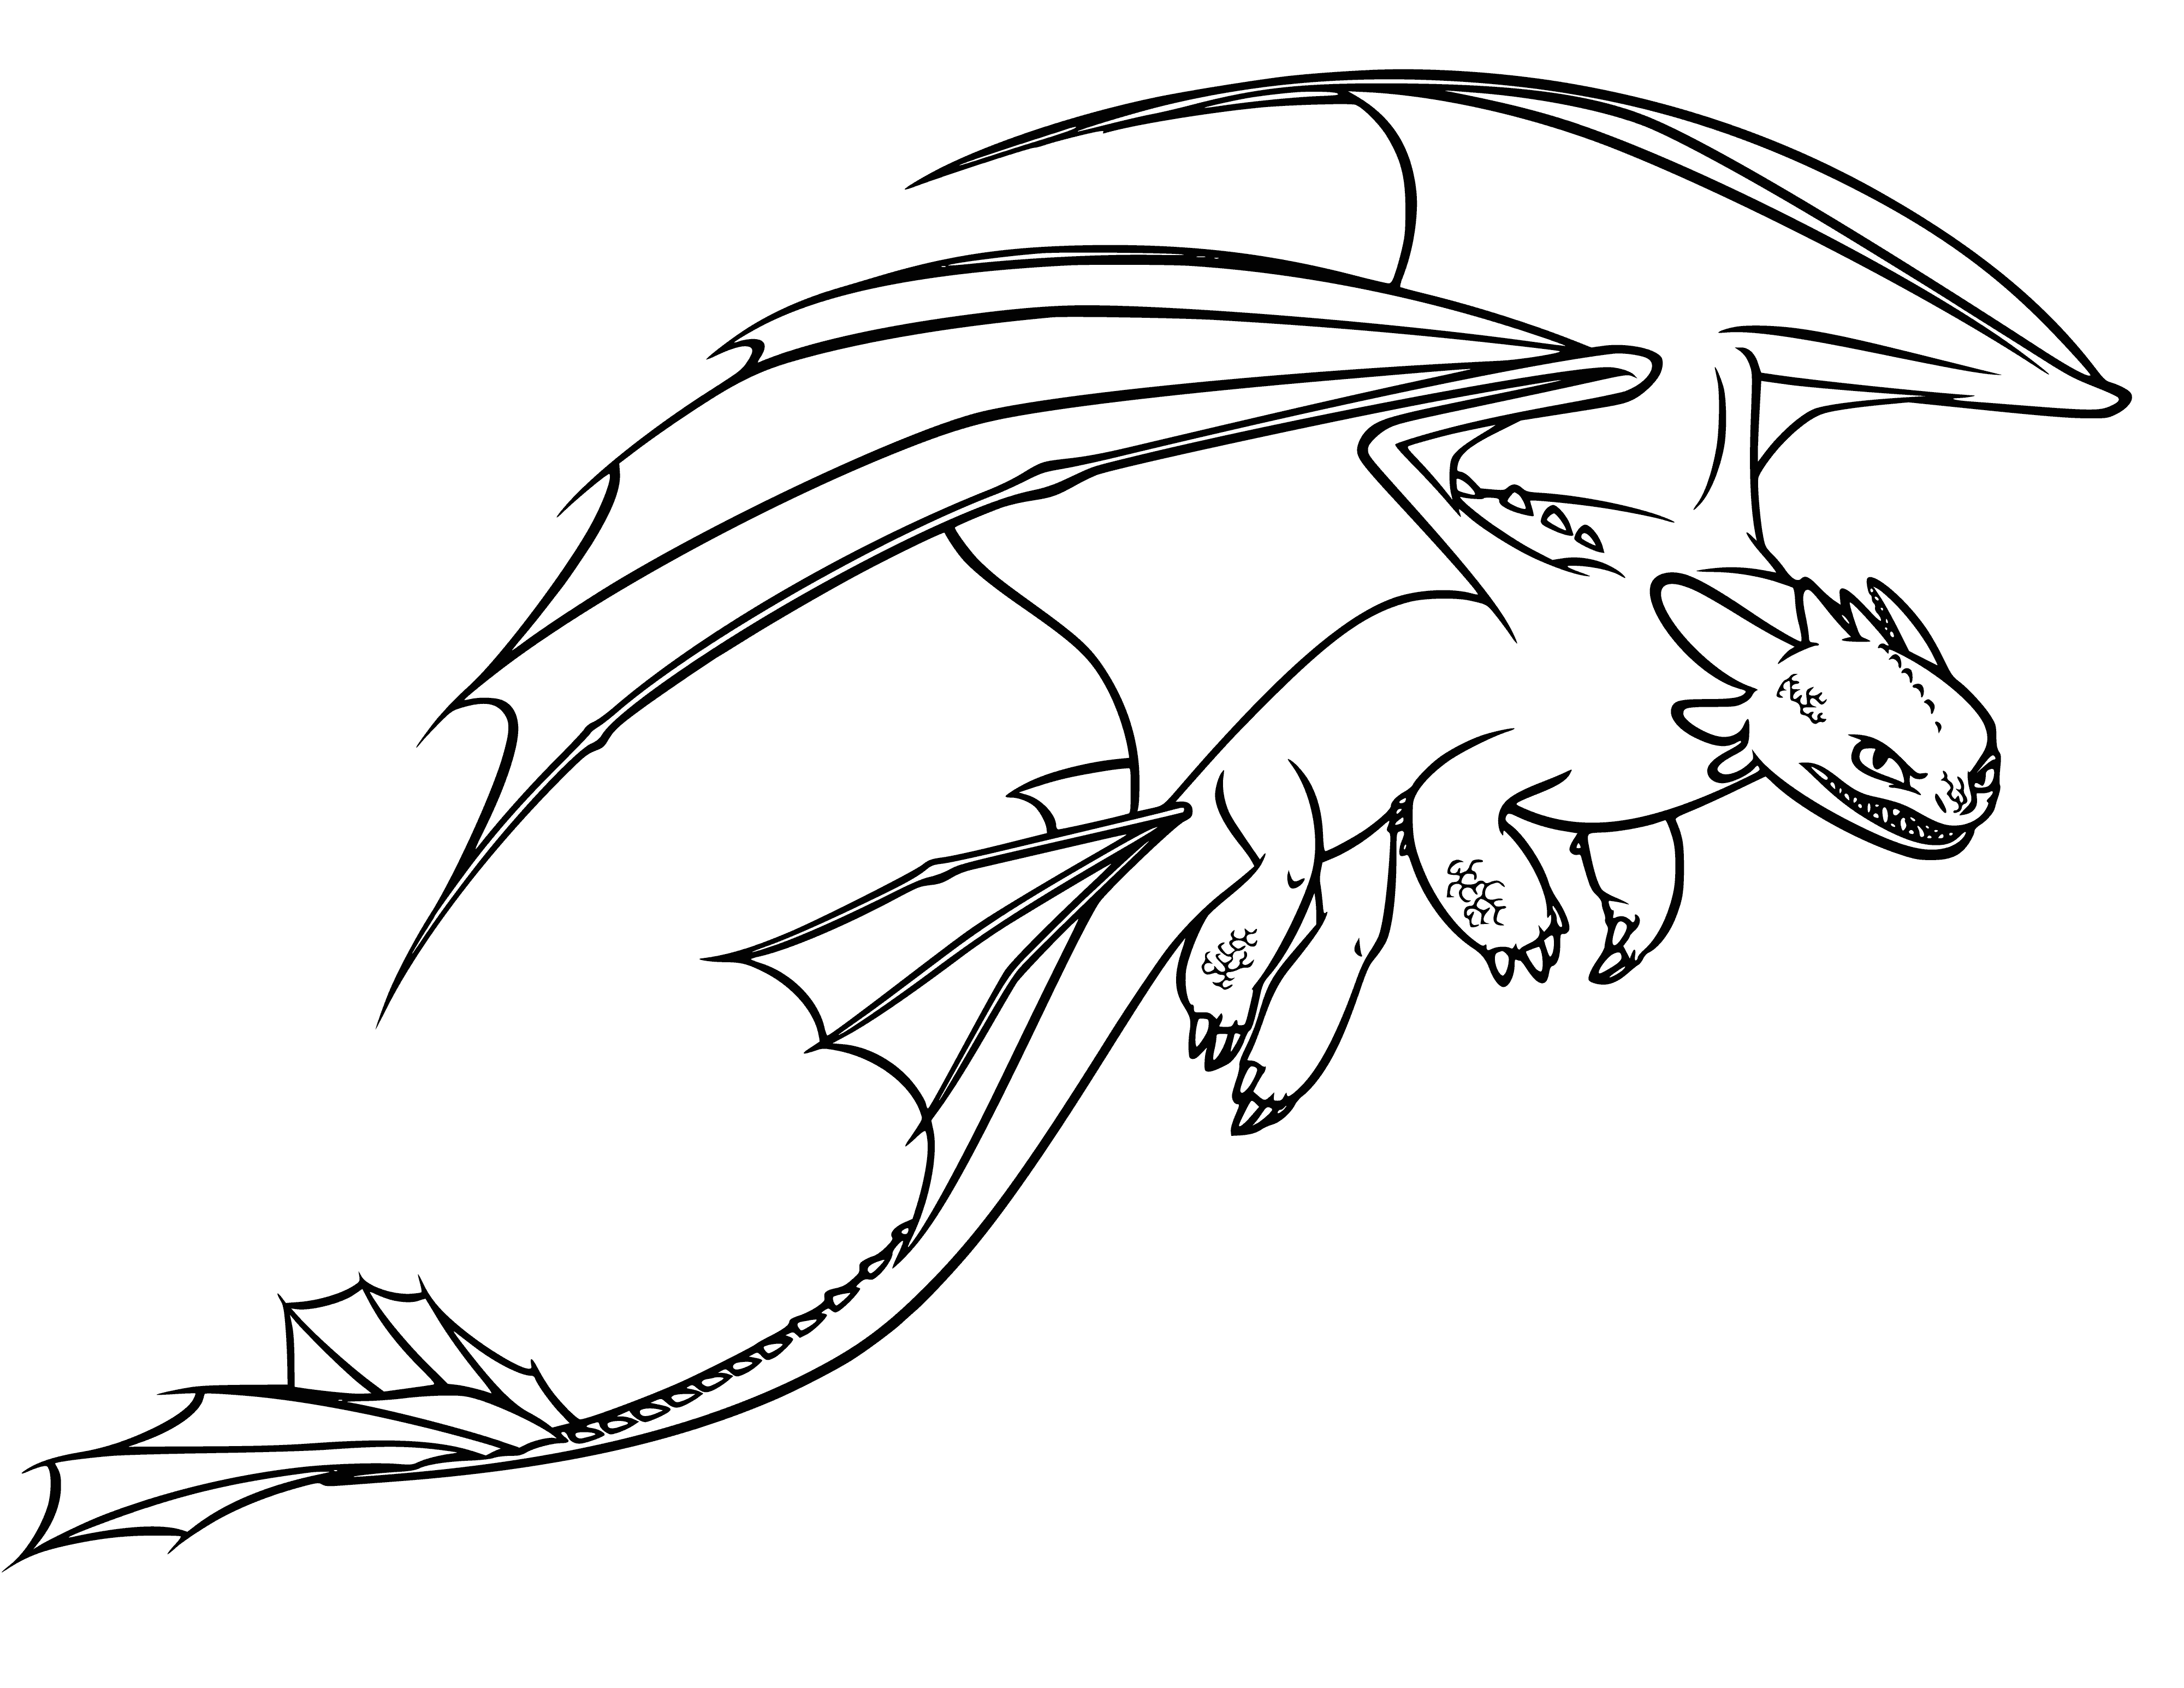 coloring page: Dragon flies in night sky, black and large wings, flying over city lit by moon and stars.